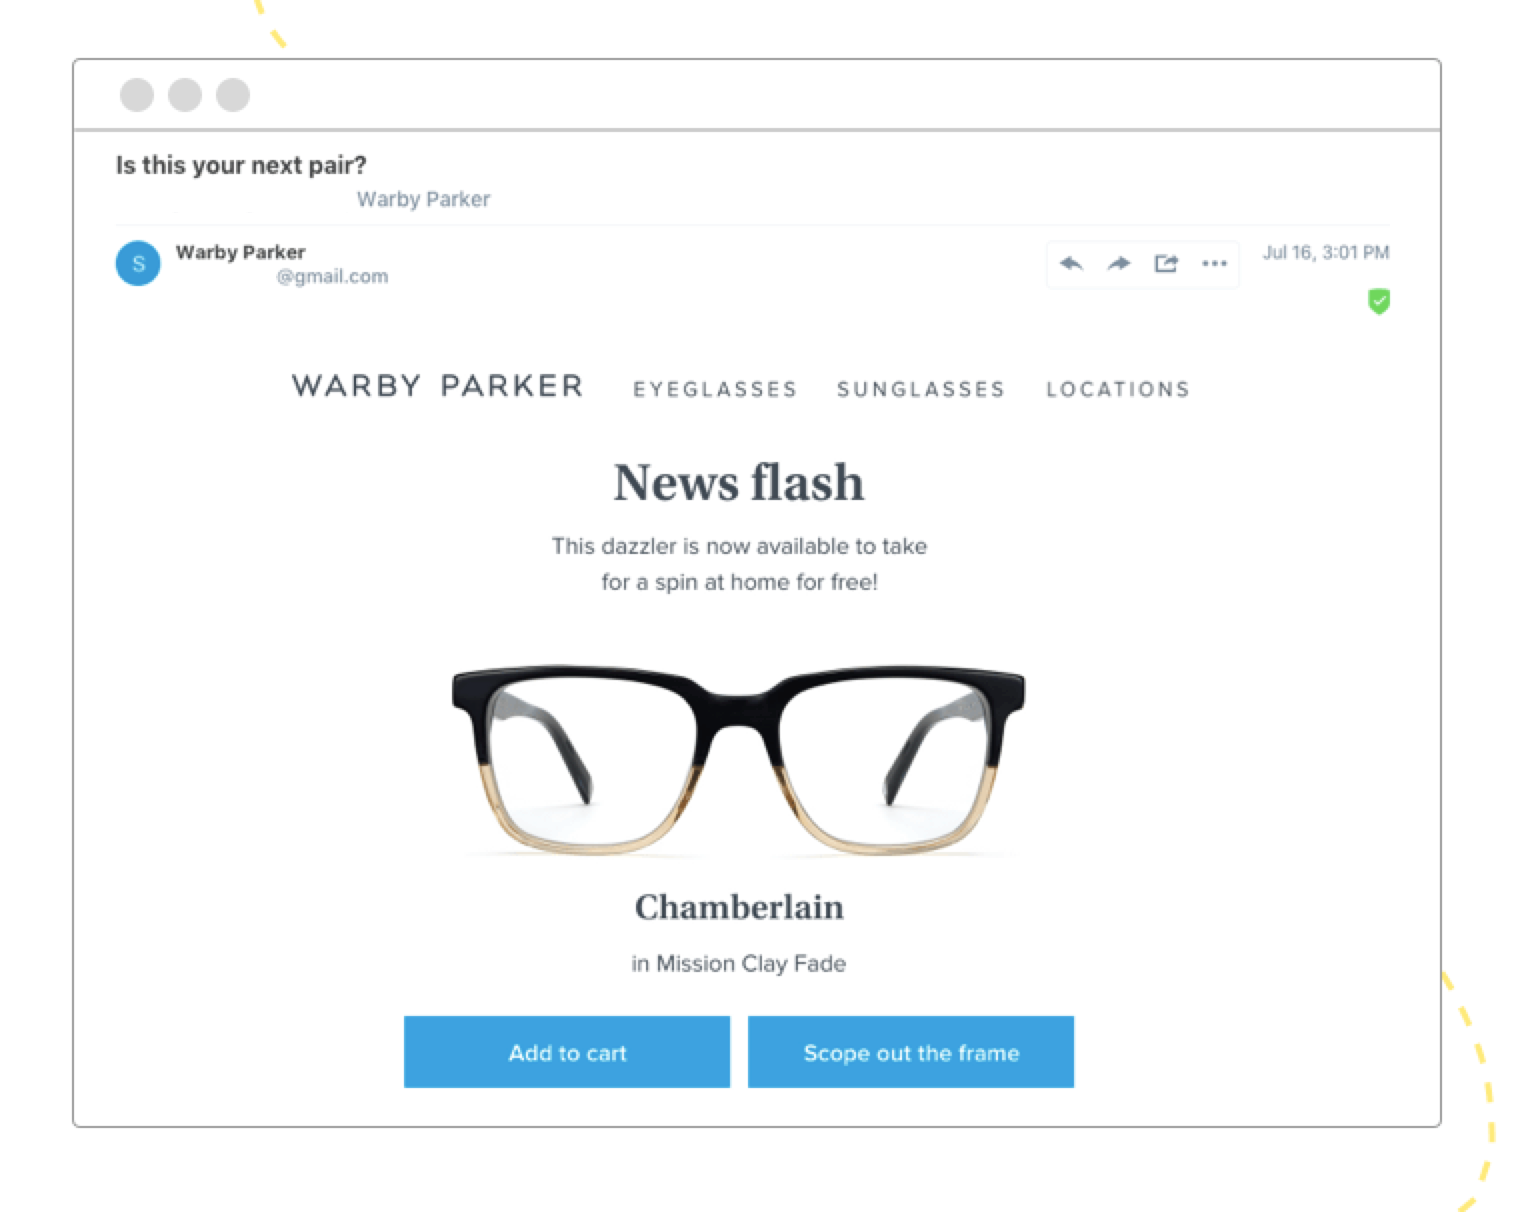 warby-parker-browse-abandonment-hive-email-marketing